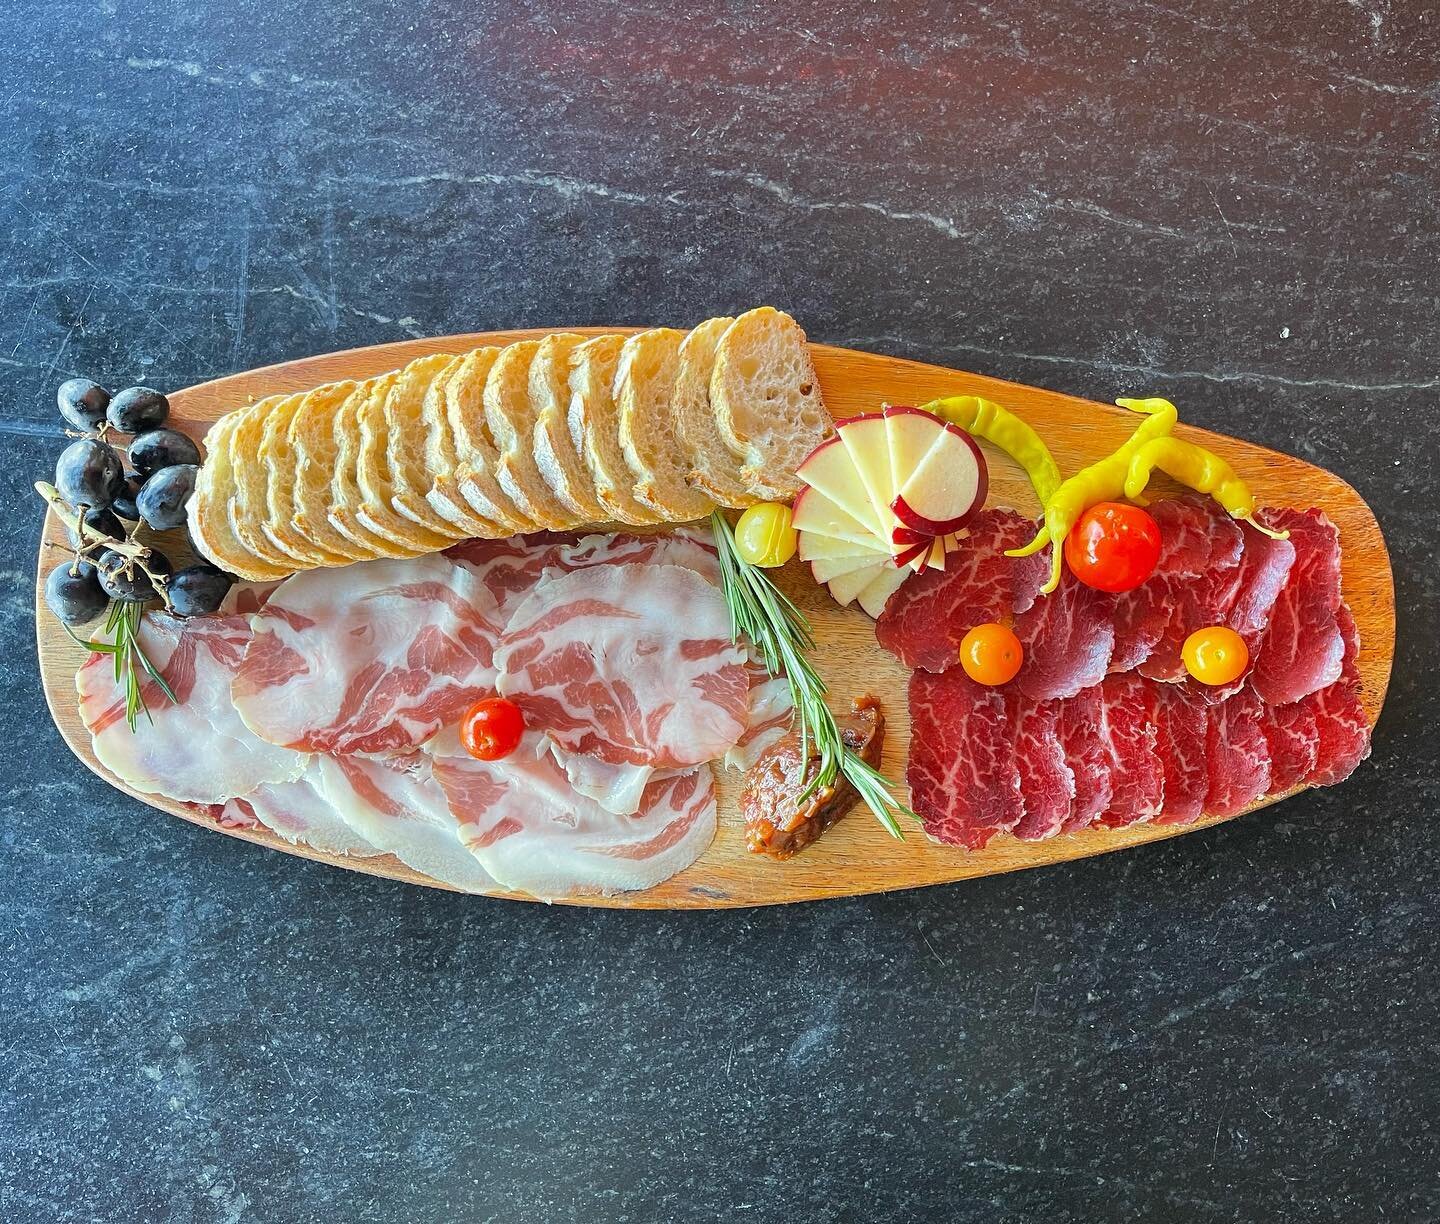 We are pleased to introduce an amazing charcuterie producer from Rockport, Maine. 
- A Small Good -
Here we are featuring Bresola and Coppa served with pickled heirloom tomatoes, piparra peppers, tomato chutney, apples, grapes and baguette.
Beginning